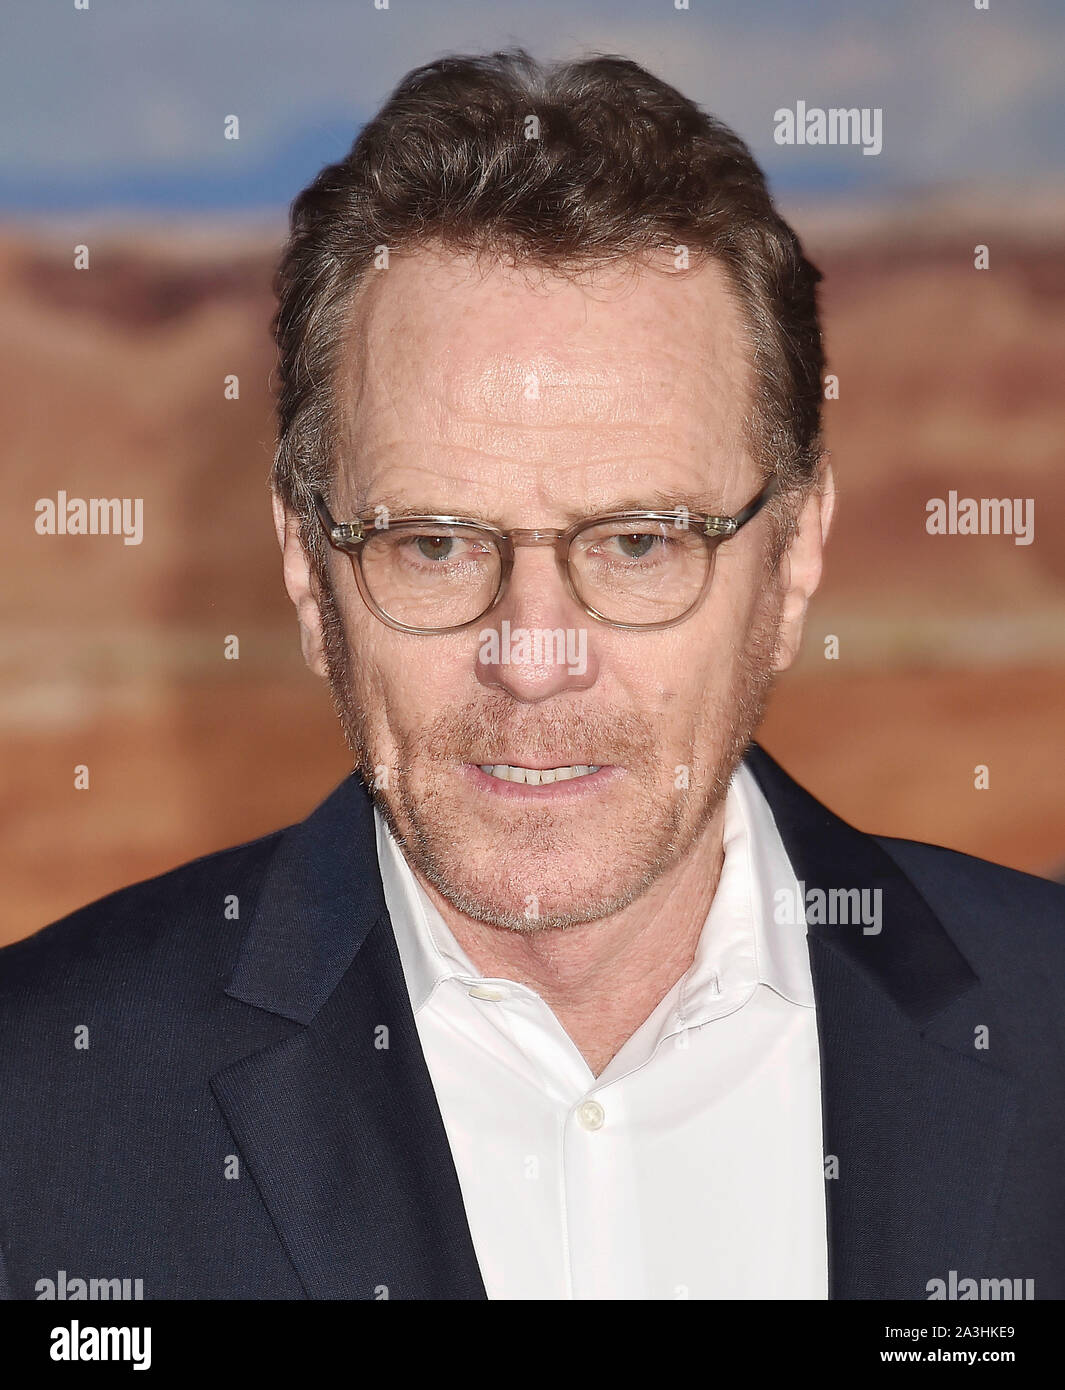 WESTWOOD, CA - OCTOBER 07: Bryan Cranston attends the premiere of Netflix's 'El Camino: A Breaking Bad Movie' at Regency Village Theatre on October 07, 2019 in Westwood, California. Stock Photo